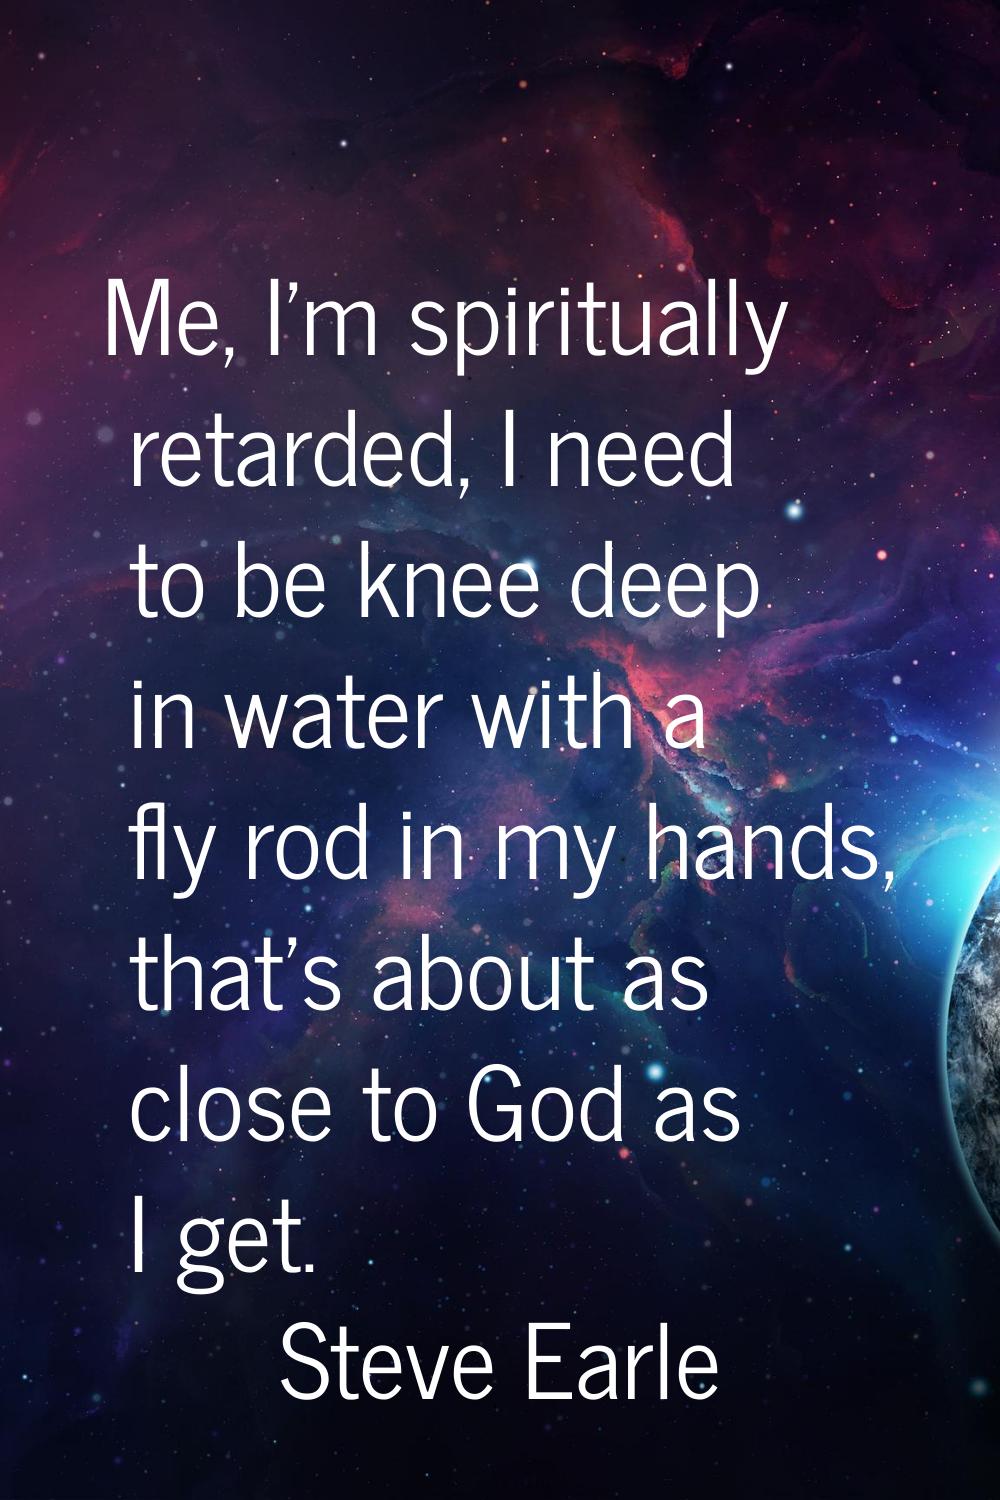 Me, I'm spiritually retarded, I need to be knee deep in water with a fly rod in my hands, that's ab